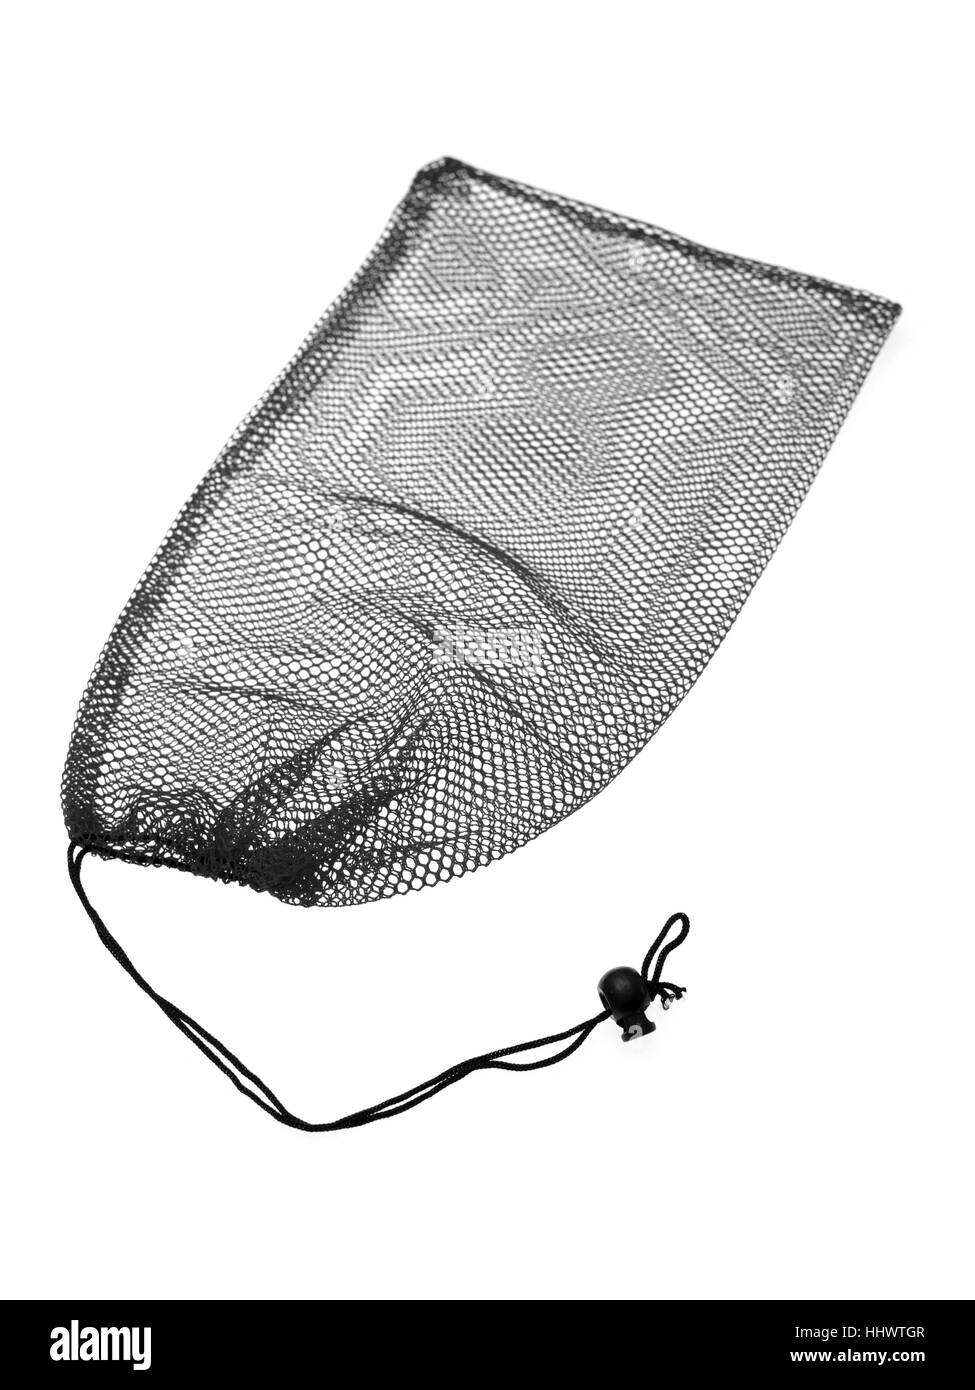 Outdoor netting Black and White Stock Photos & Images - Alamy